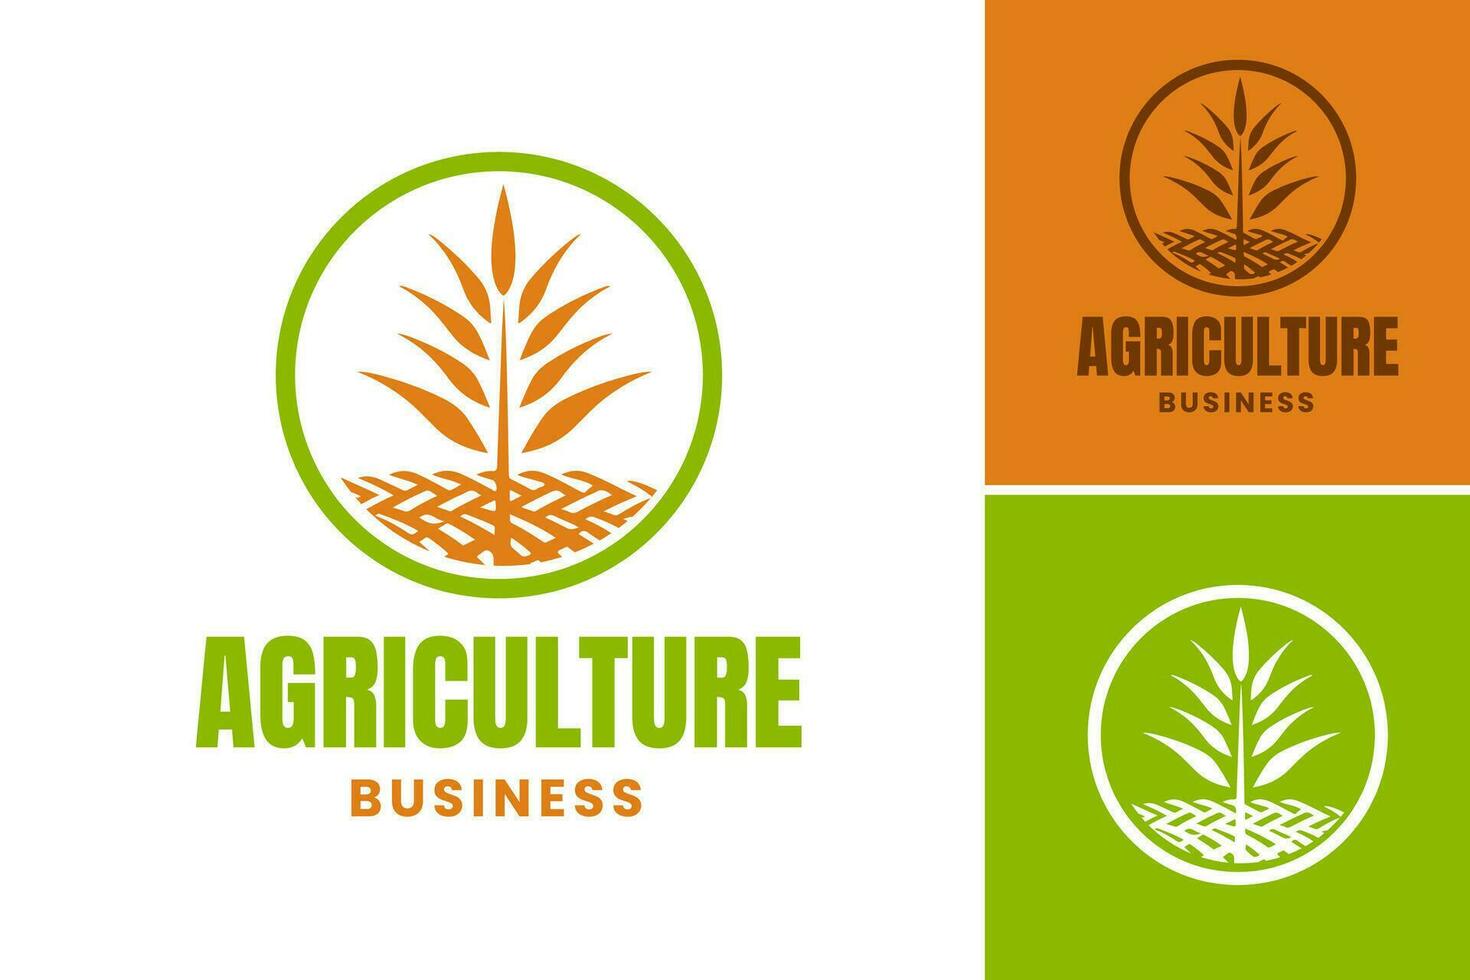 Logo design for a business in the agriculture industry, suitable for farms, agricultural equipment manufacturers, organic food companies, and any other related ventures. vector